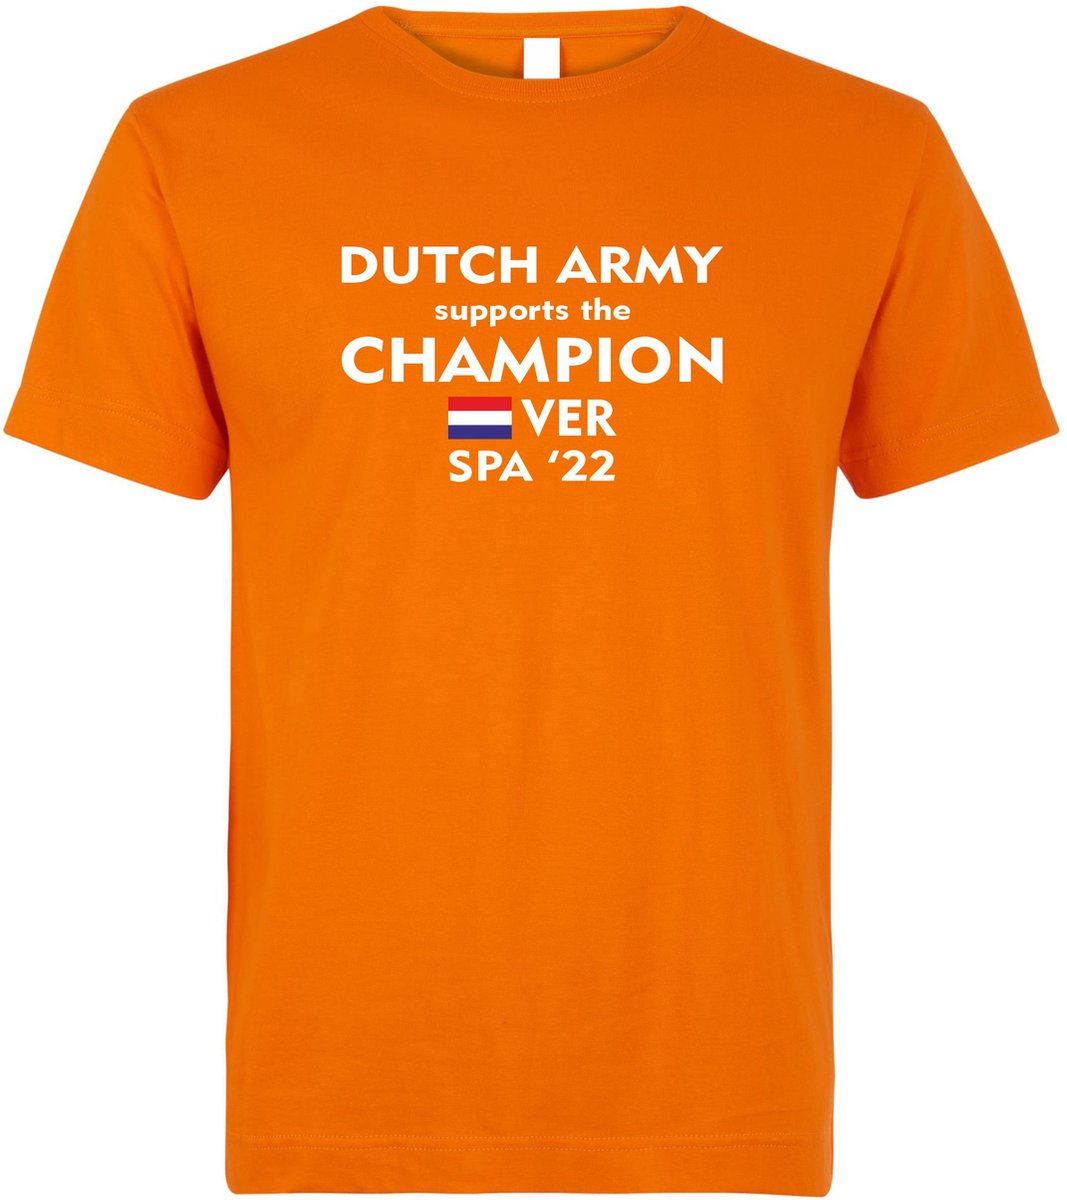 T-shirt Dutch Army supports the Champion Spa 22 | Max Verstappen / Red Bull Racing / Formule 1 fan | Grand Prix Circuit Spa-Francorchamps | kleding shirt | Oranje | maat 3XL